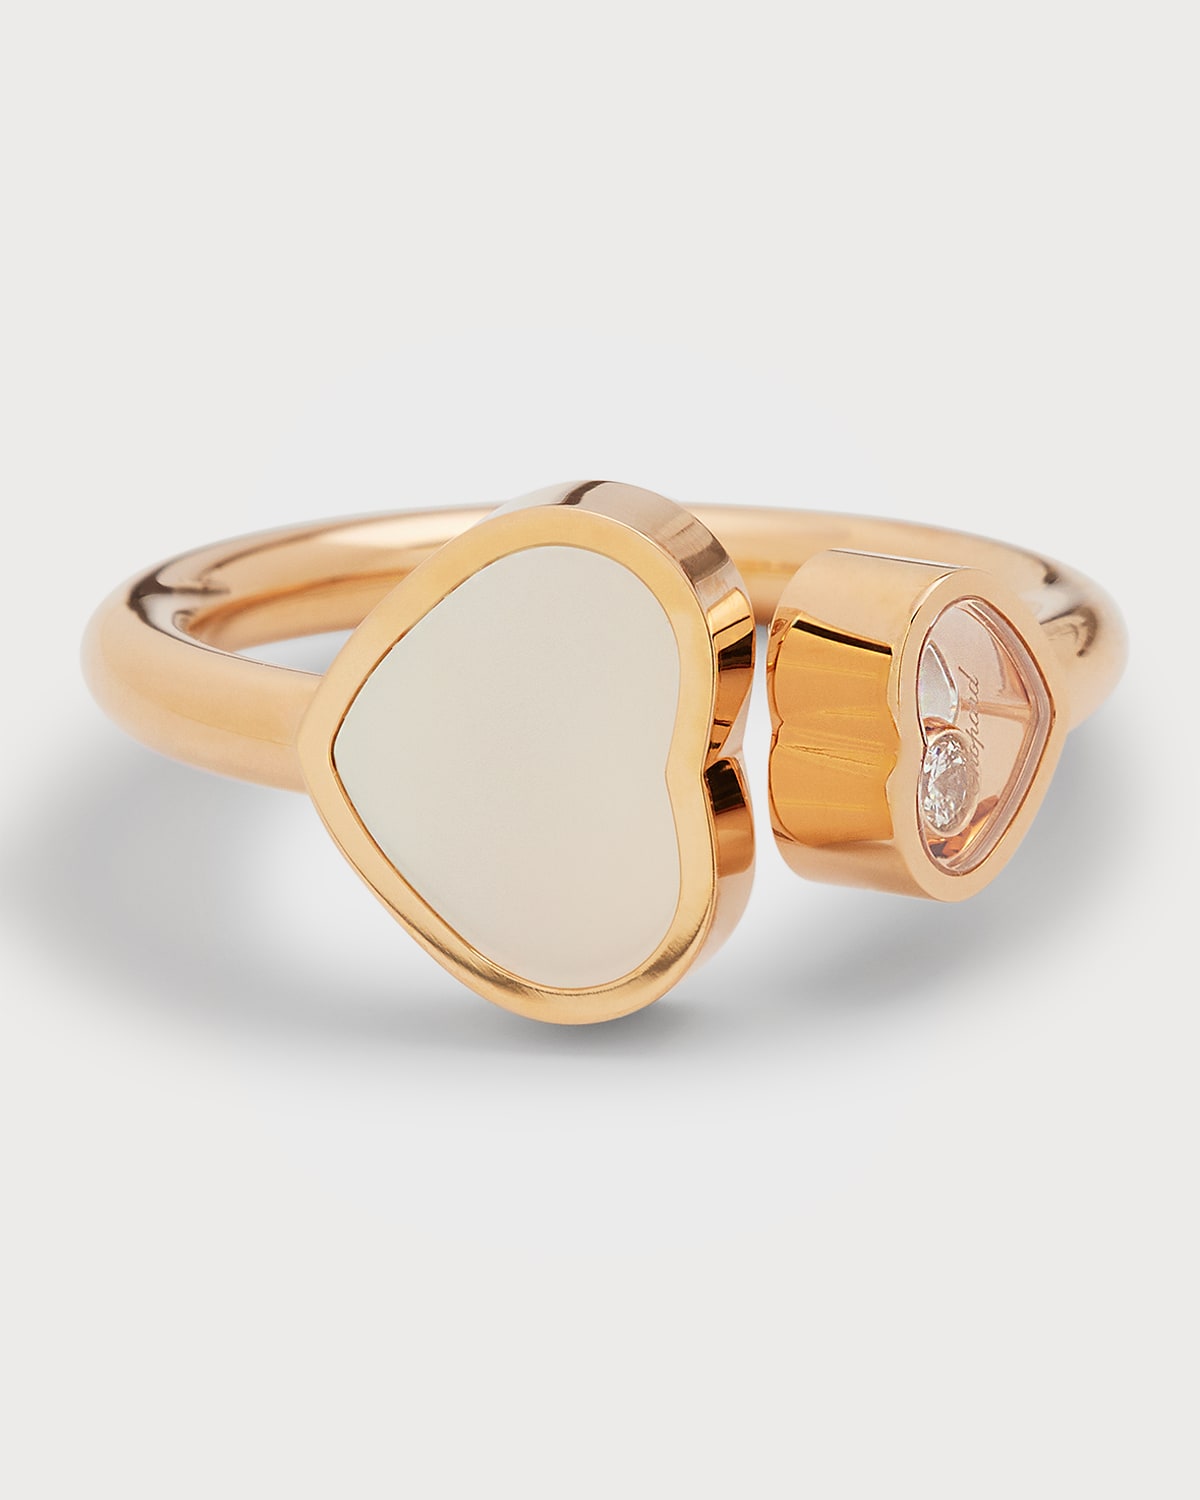 Happy Hearts 18K Rose Gold Mother-of-Pearl & Diamond Ring, EU 52 / US 6